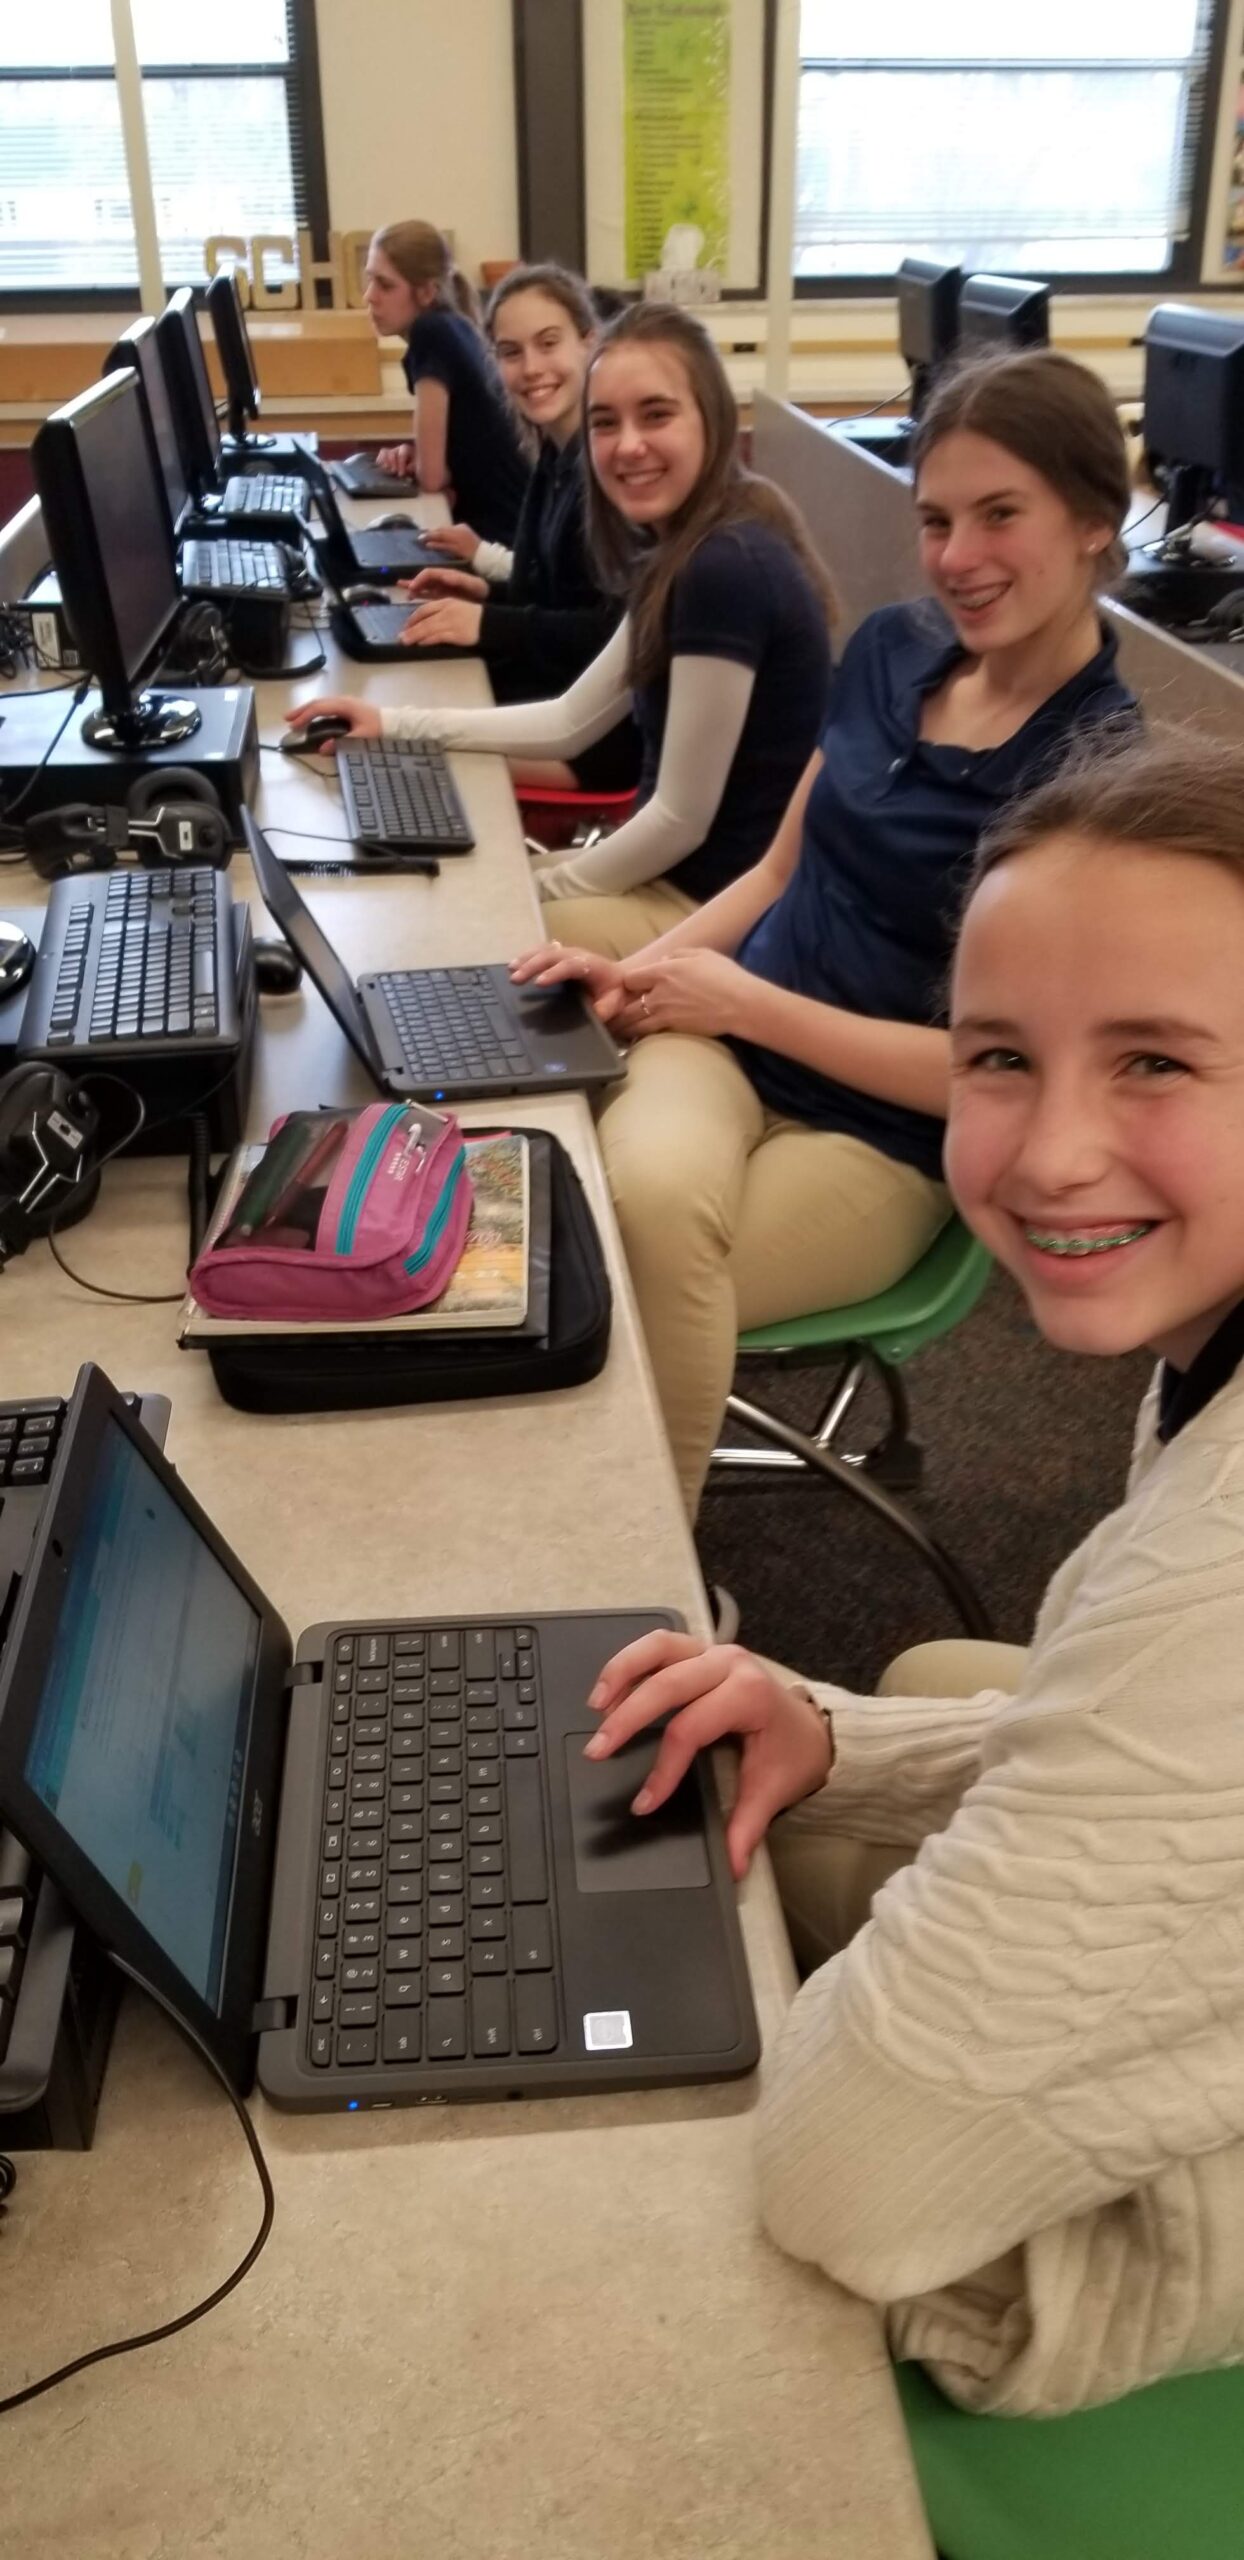 Our Lady of Lourdes Catholic School students in computer lab